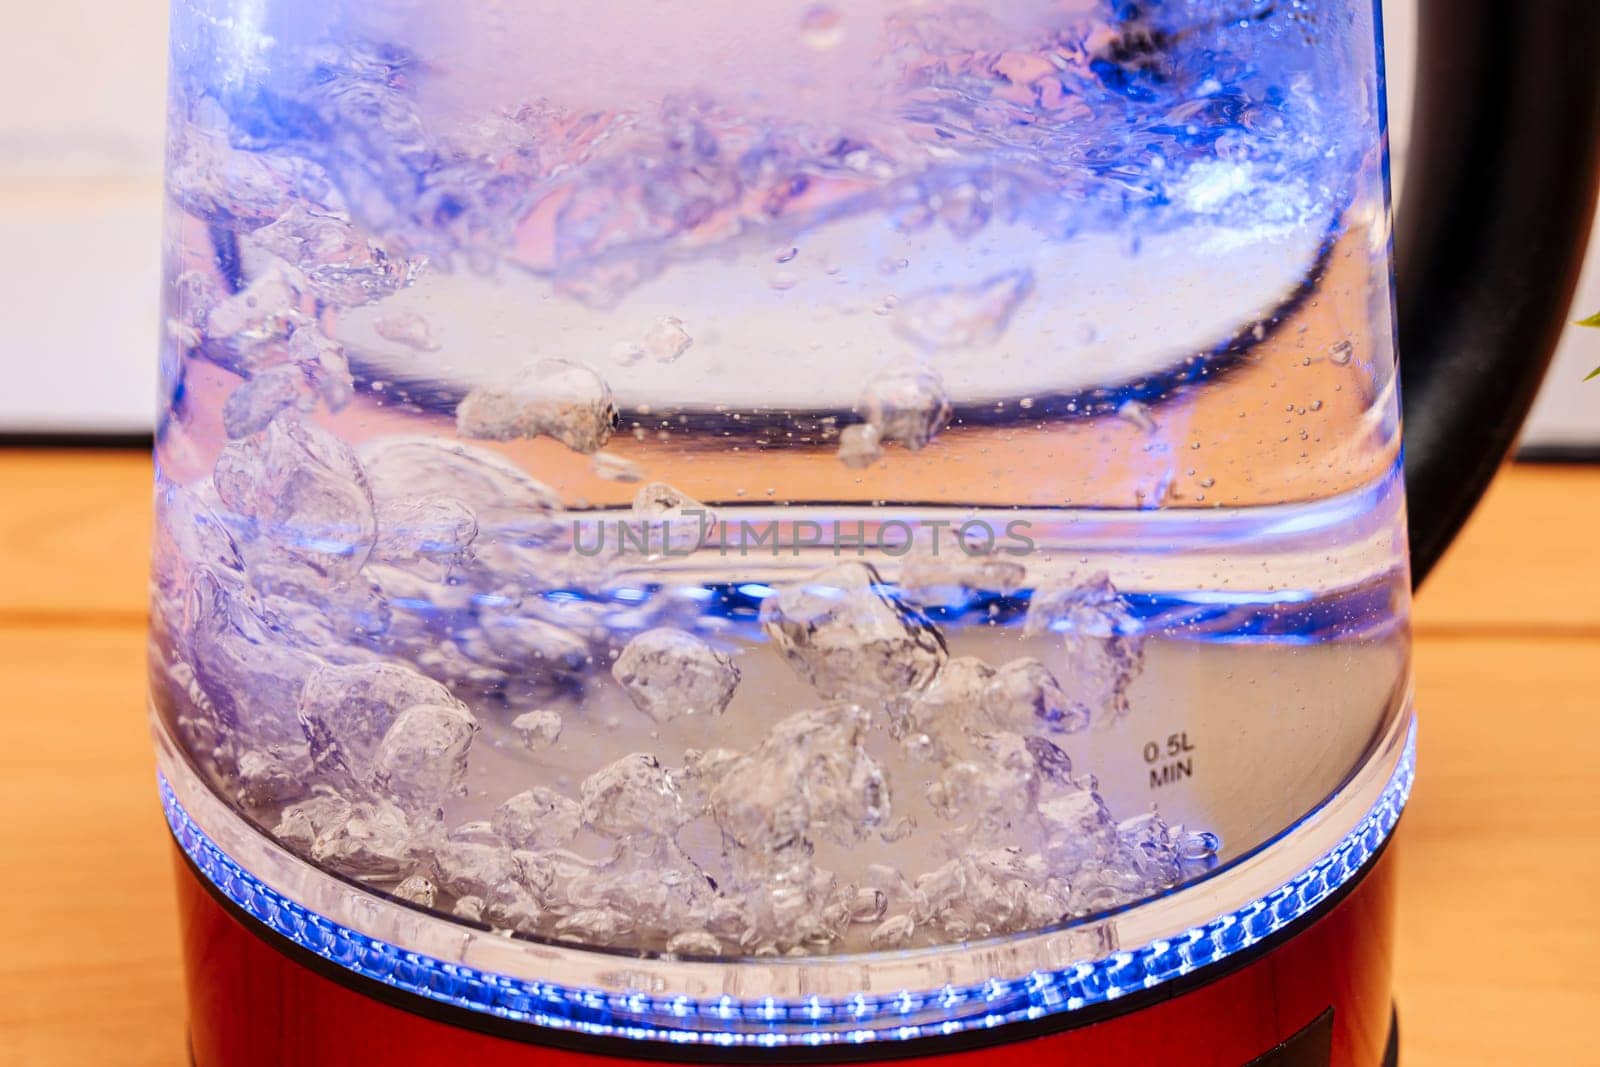 a new modern electric kettle made of red boiling glass in close-up with bubbling water and blue neon lighting. Boiling water and bubbles. Breakfast, afternoon tea